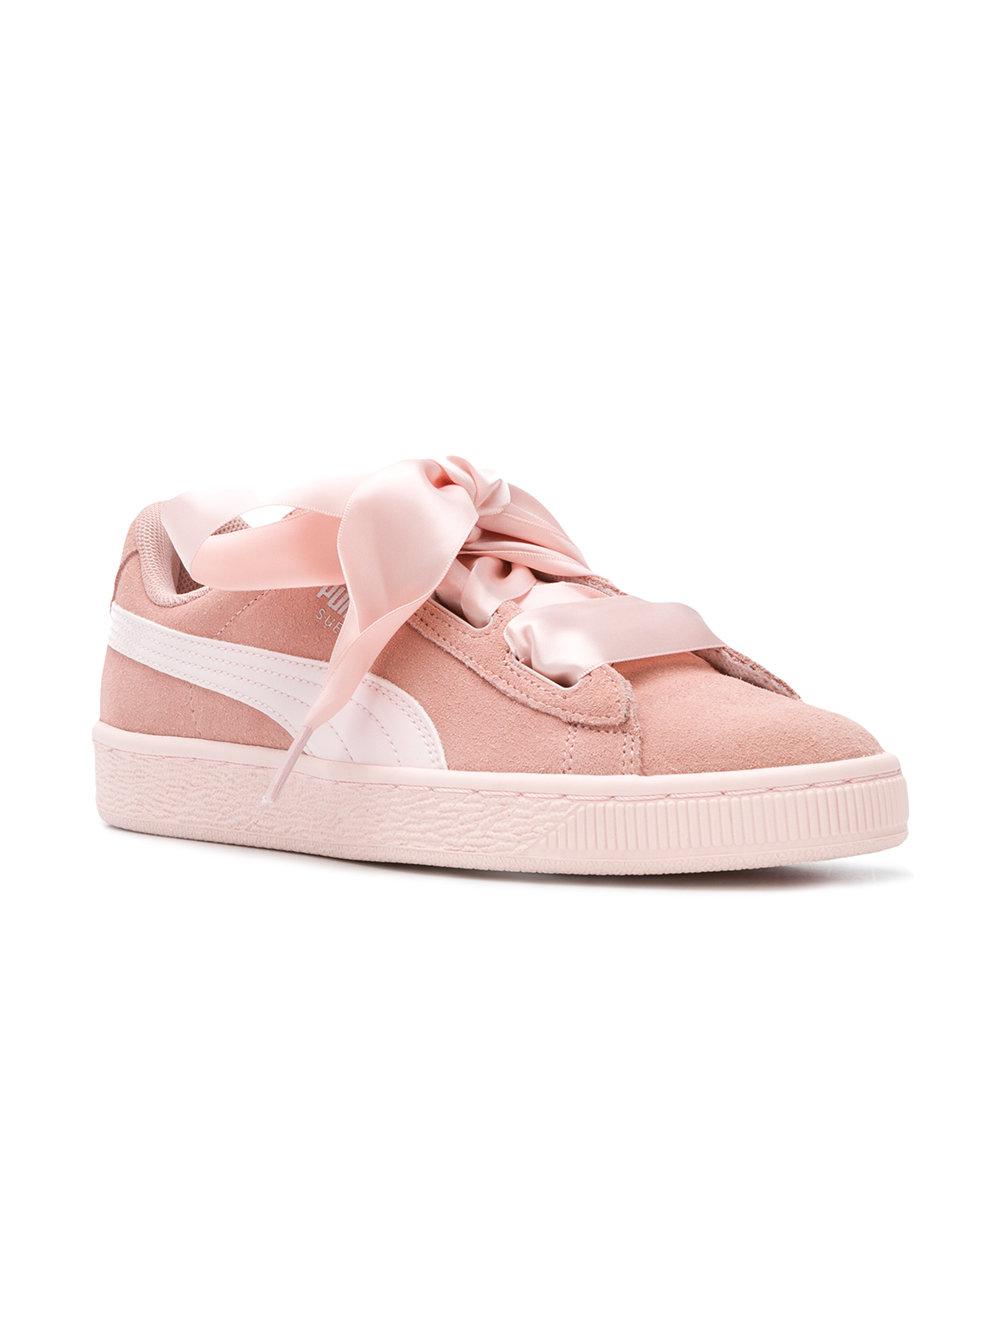 Buy > pink pumas with ribbon > in stock